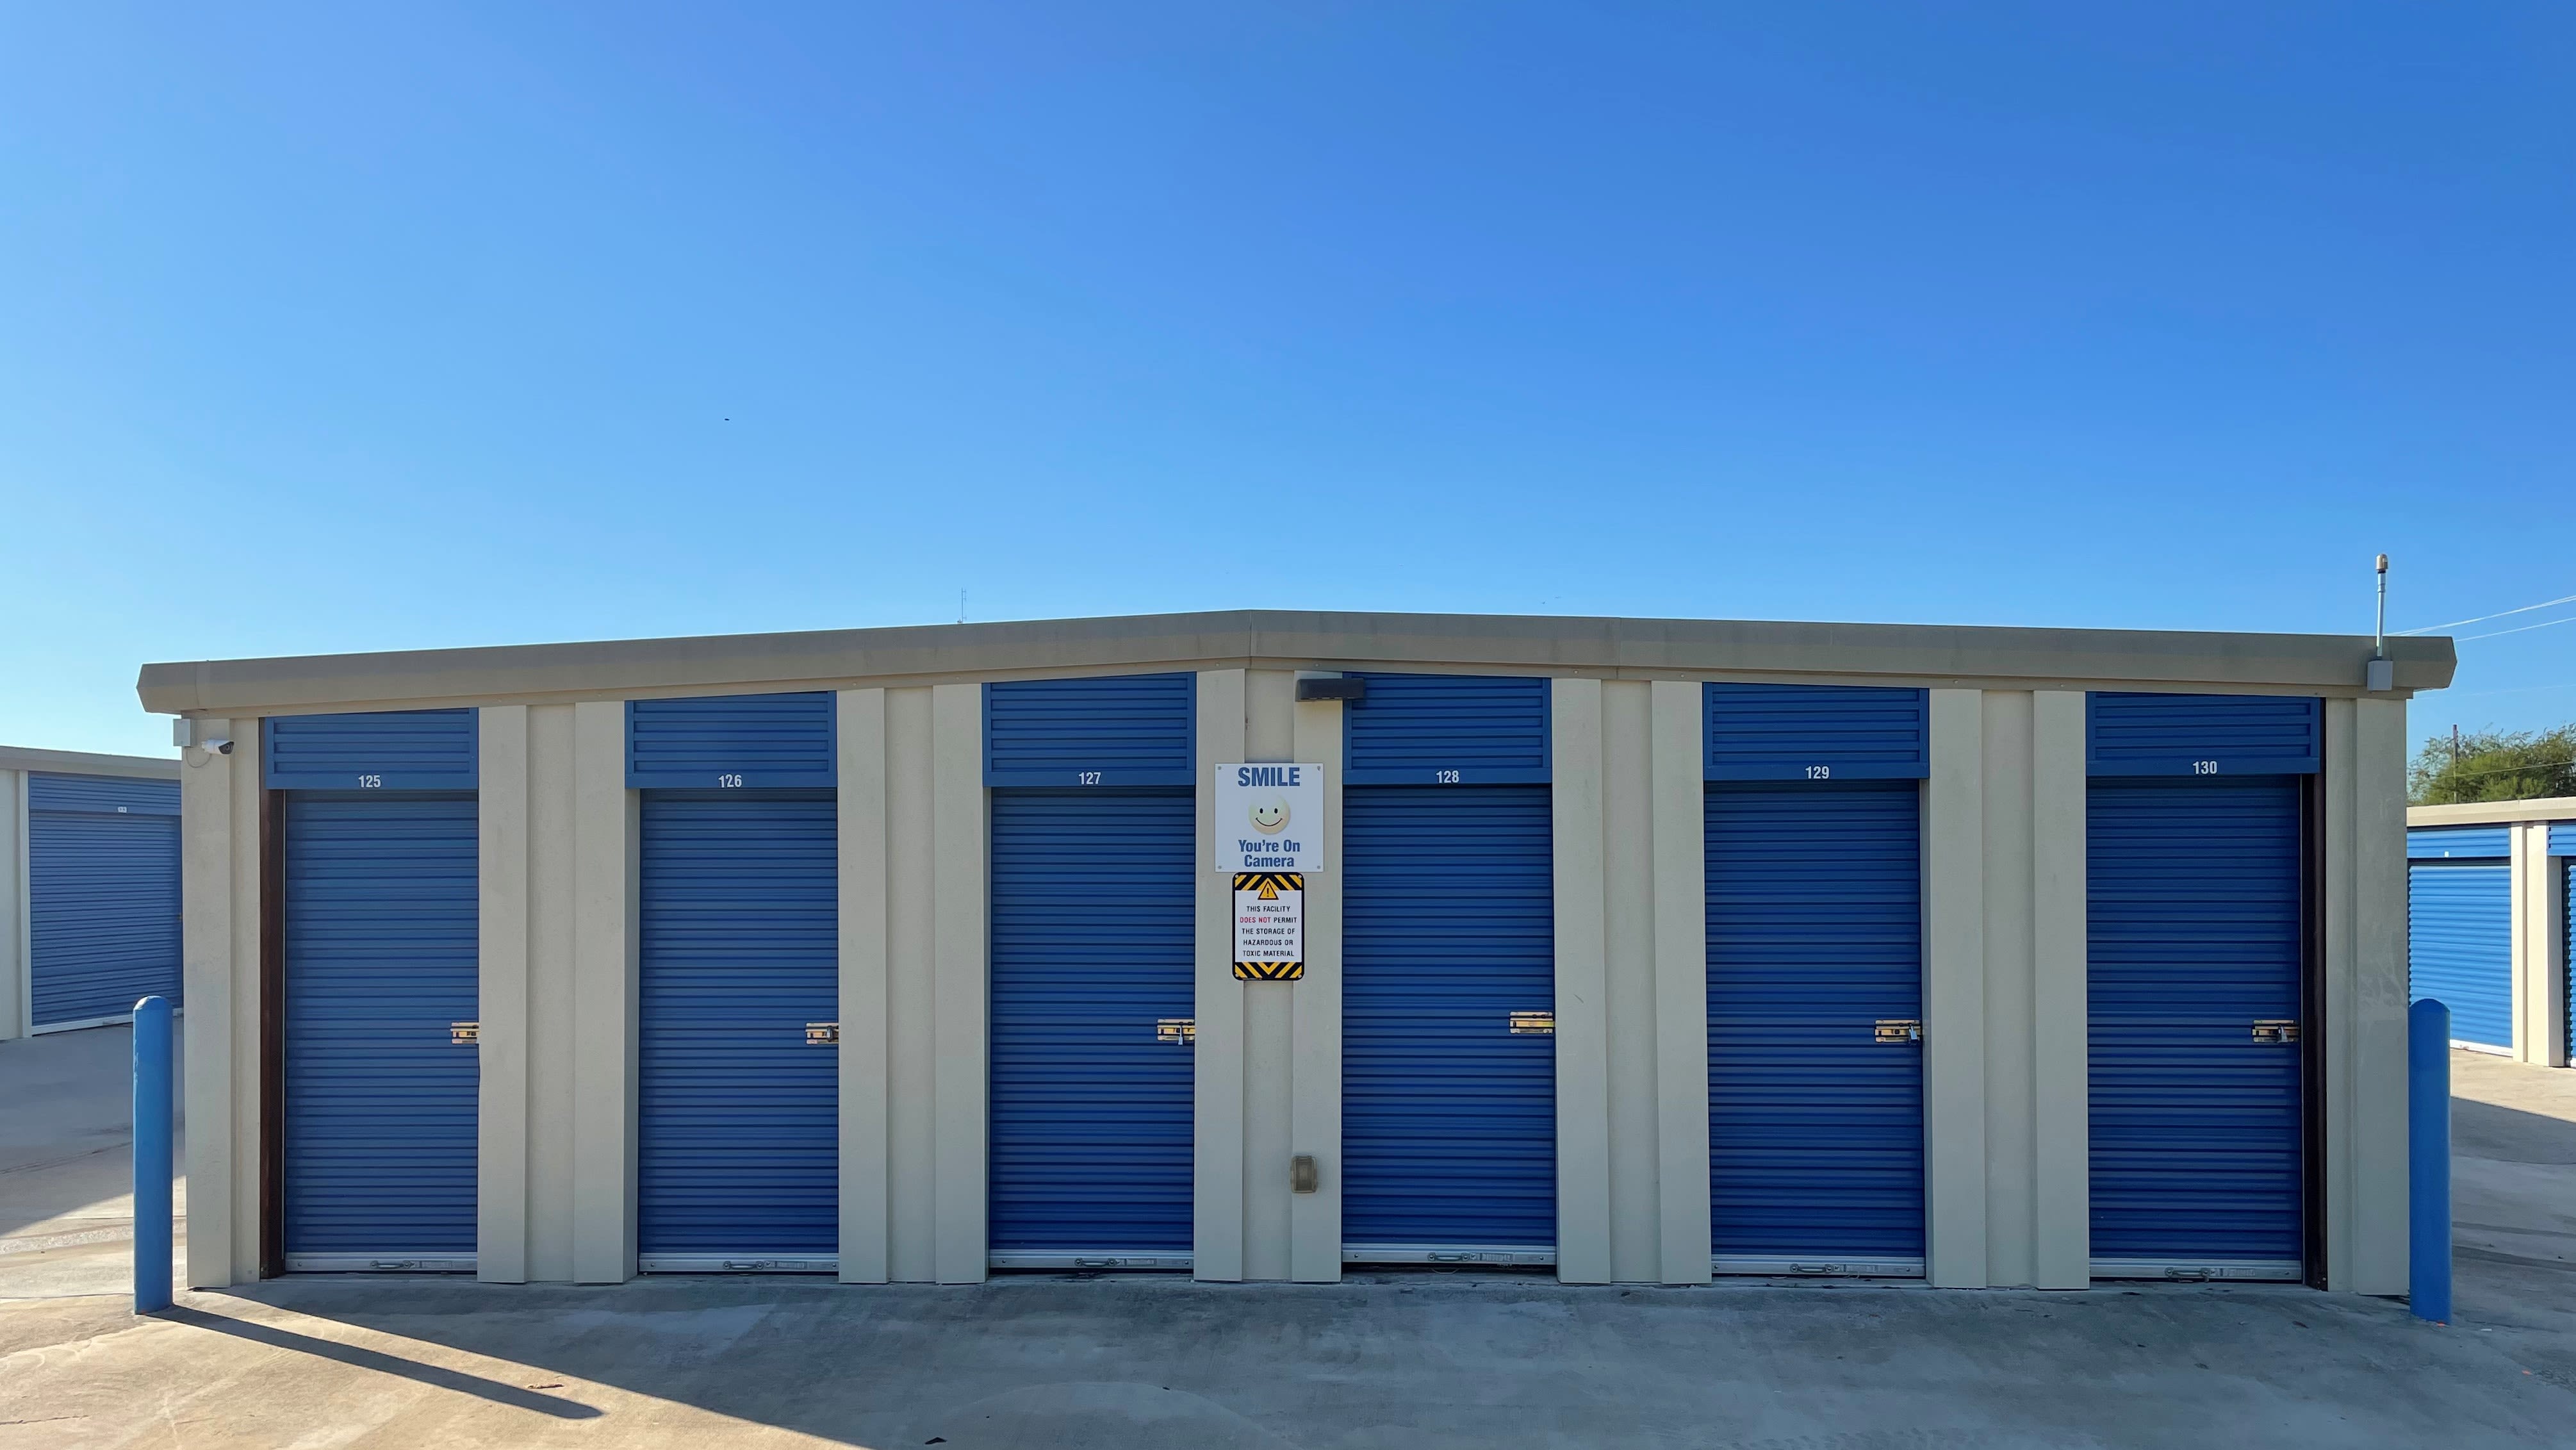 Learn more about features at KO Storage of Pearsall in Pearsall, Texas